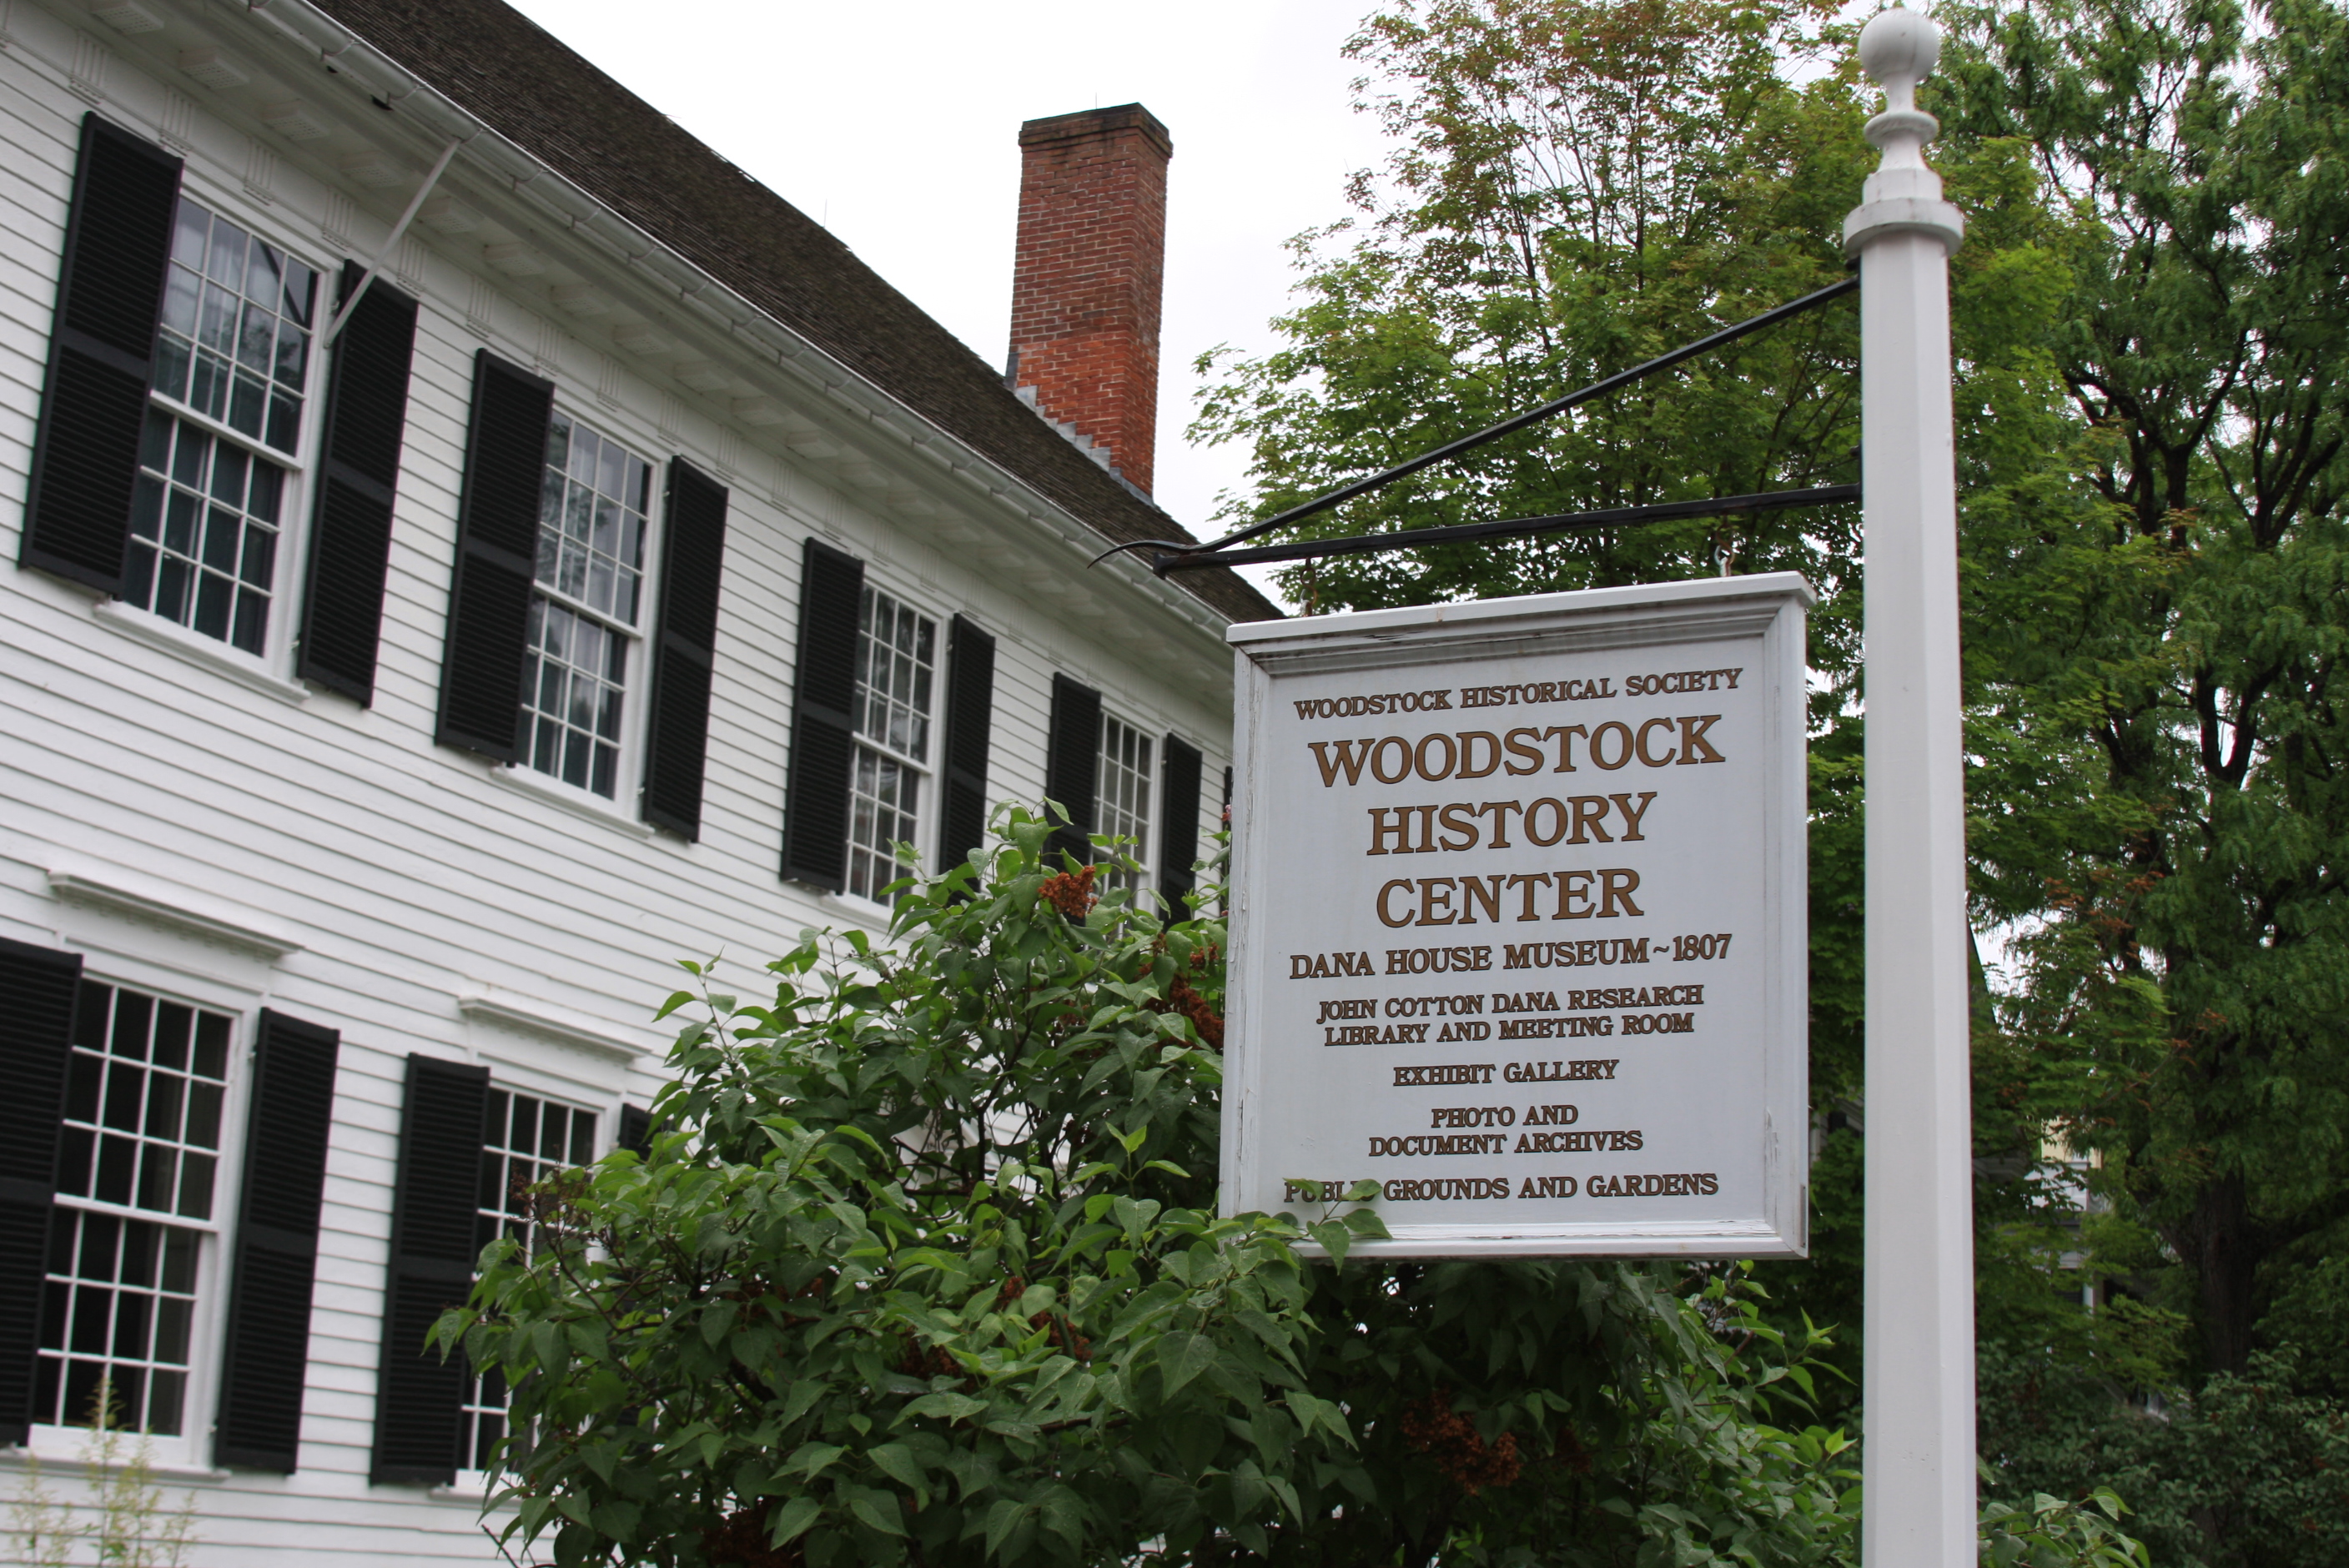 A spectacular riverside lawn and a unique artifact collection draw visitors to the Woodstock History Center.